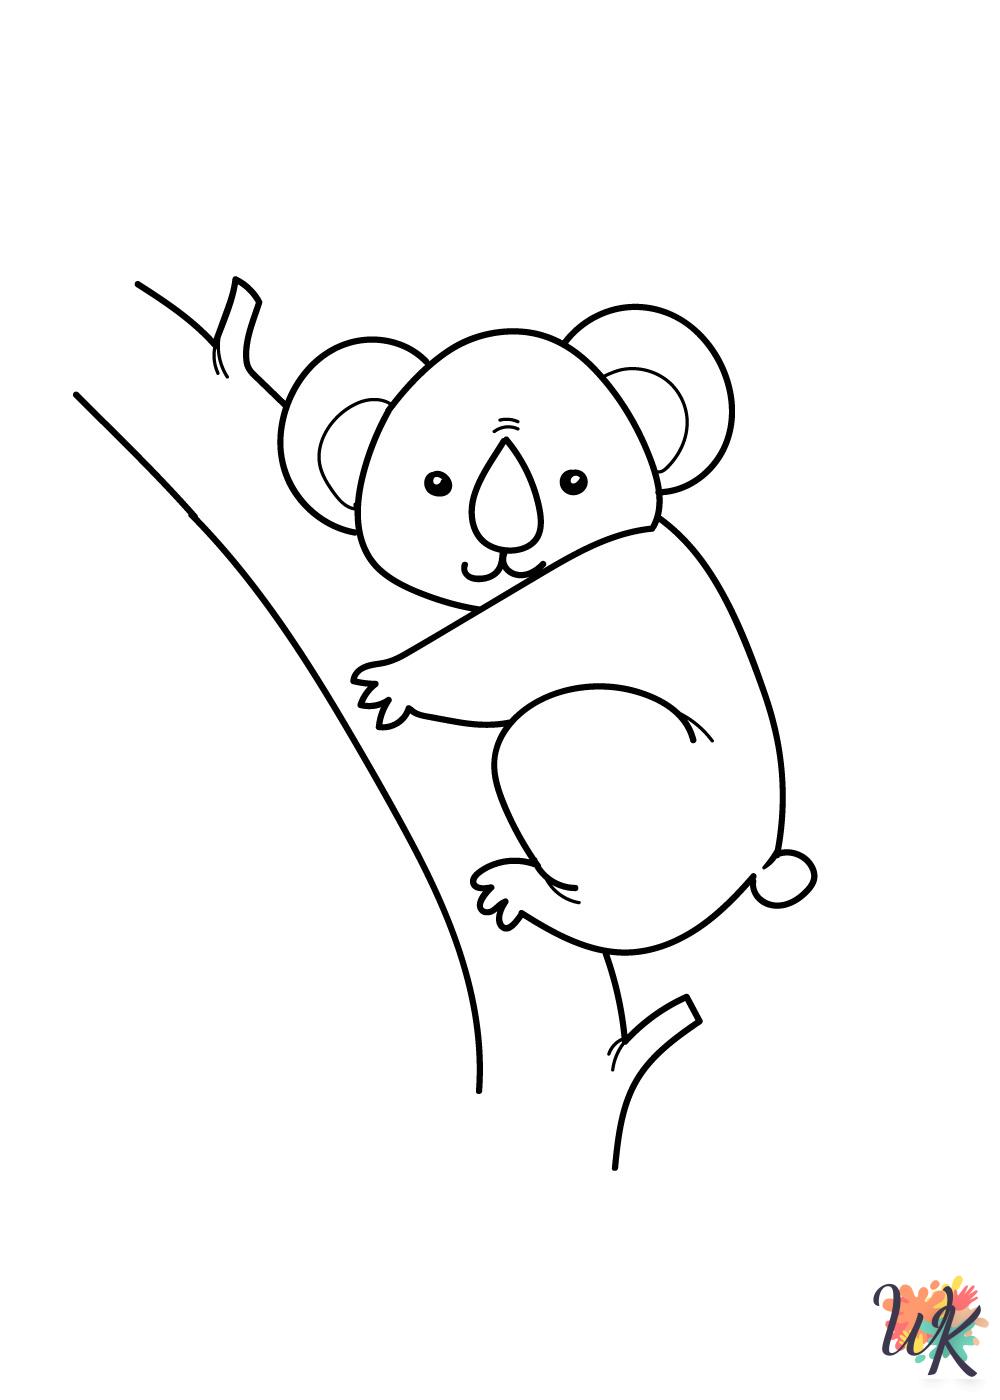 free full size printable Cute Animals coloring pages for adults pdf